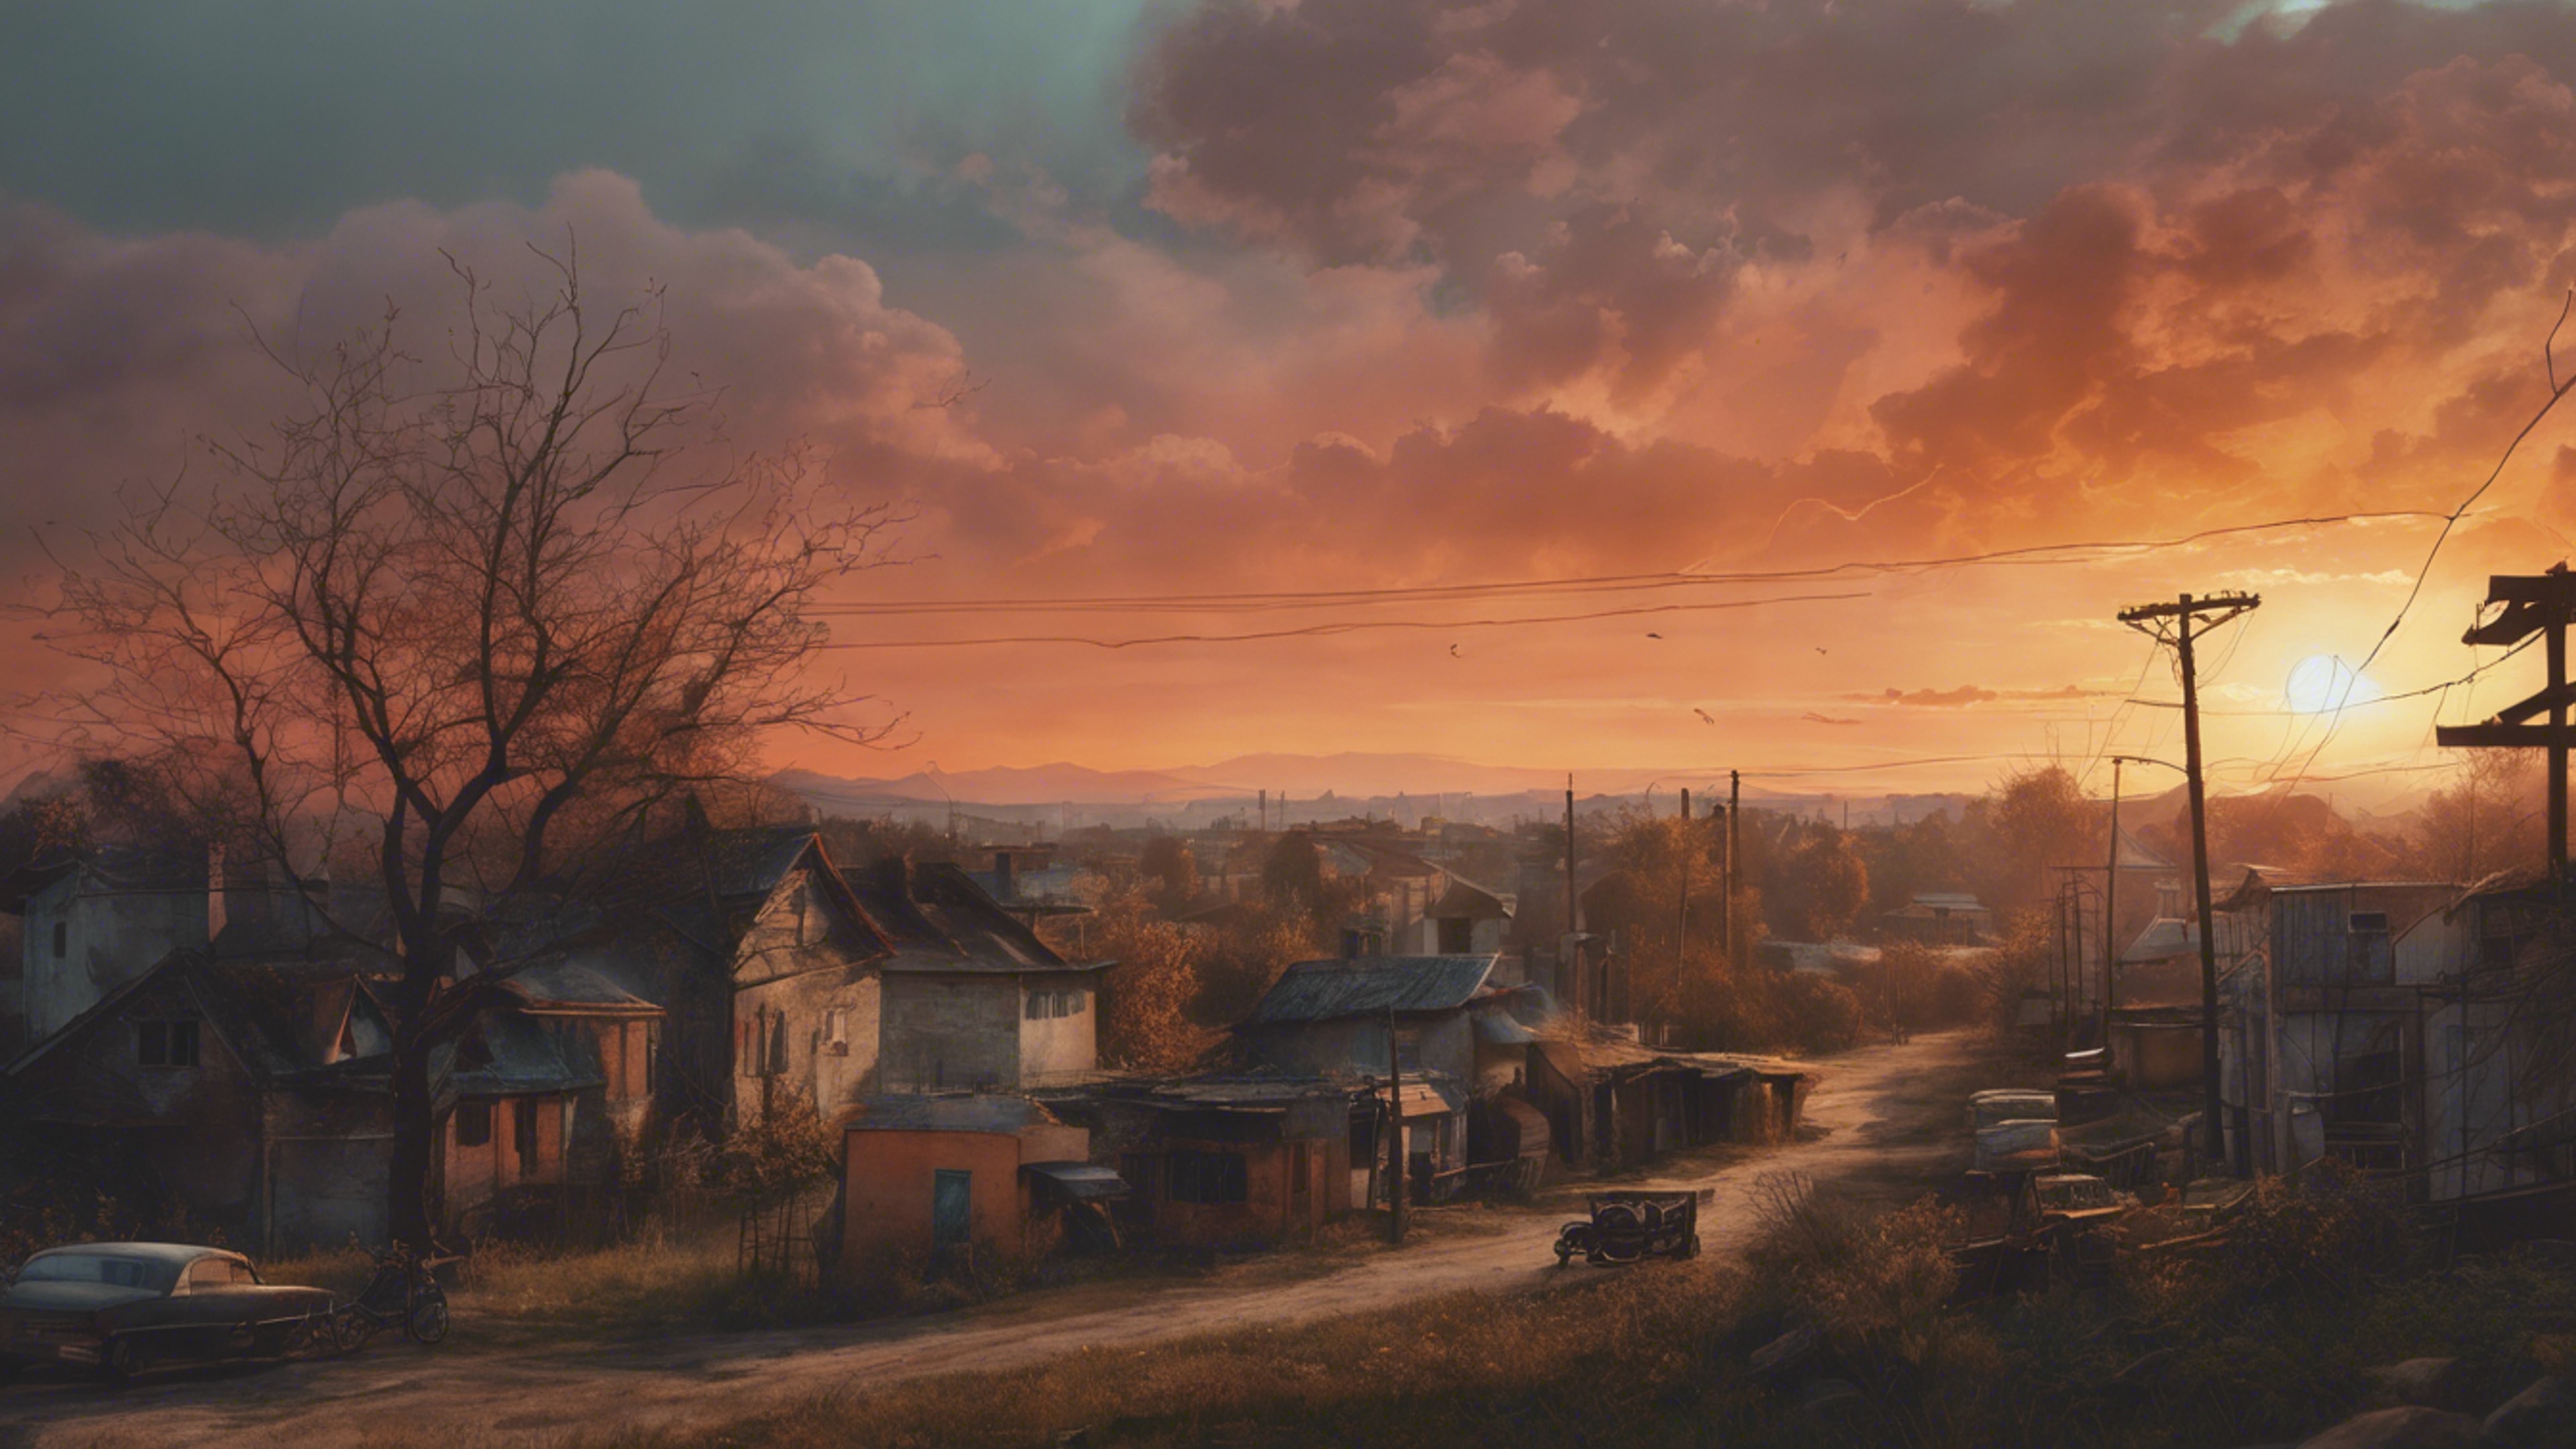 An evocative painting of a nostalgic sunset over a forgotten hometown. Обои[c4b7fcd1dd4d40f1b7ab]